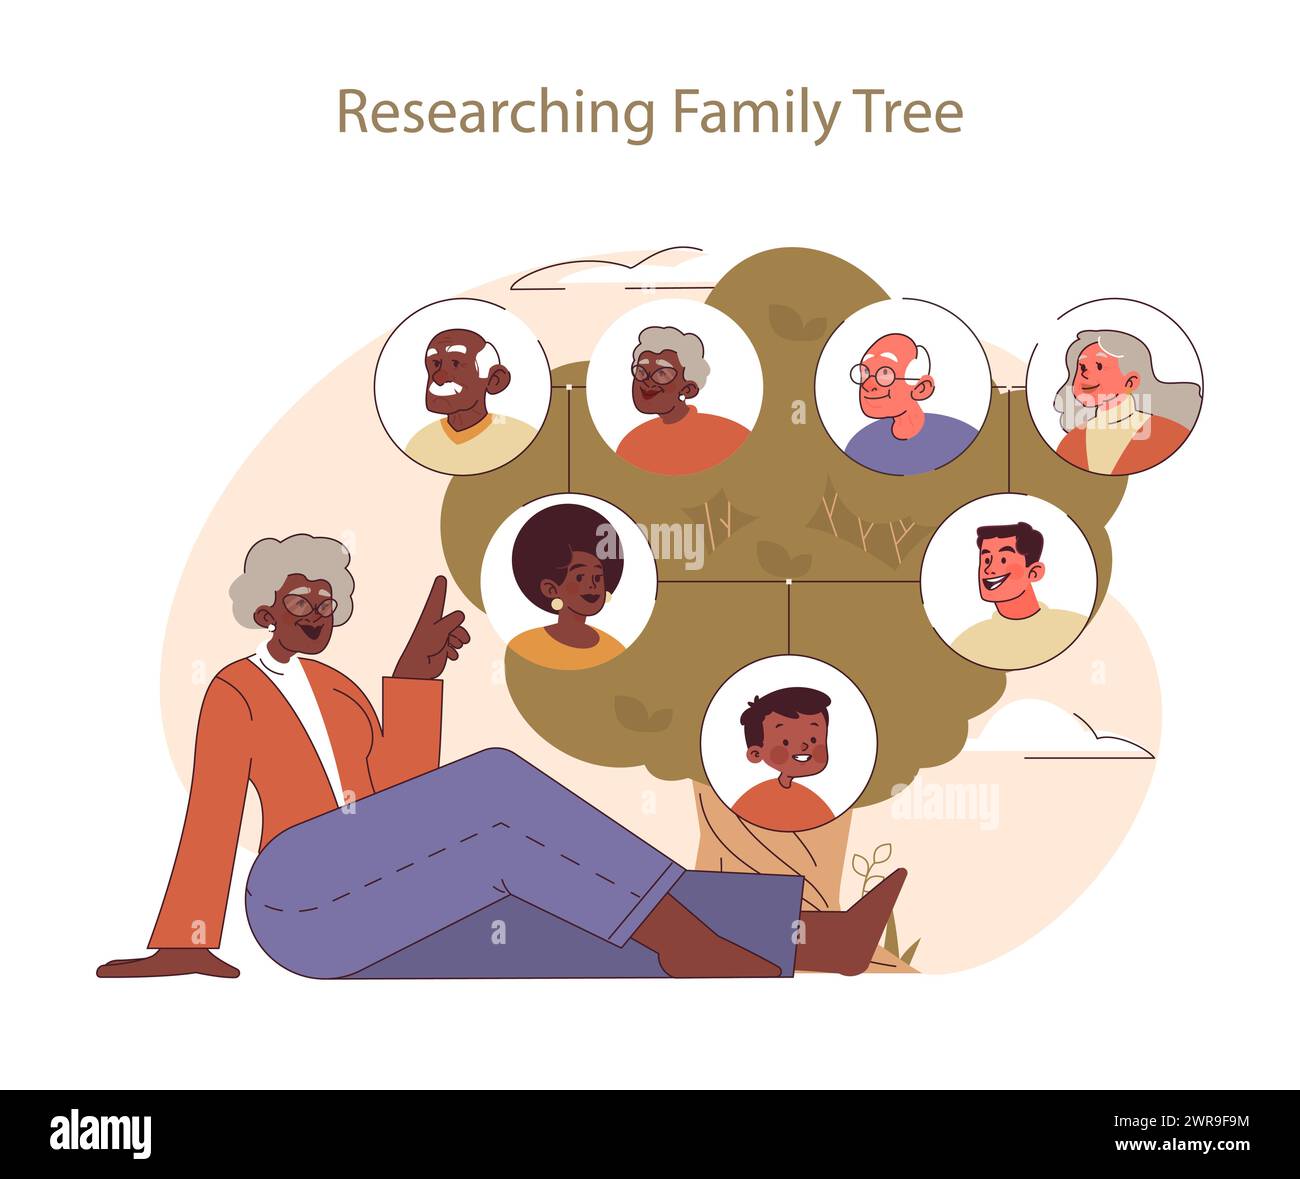 Researching family tree concept. Elderly person tracing lineage, celebrating familial heritage. Uncovering ancestral stories, embracing roots and identity. Stock Vector